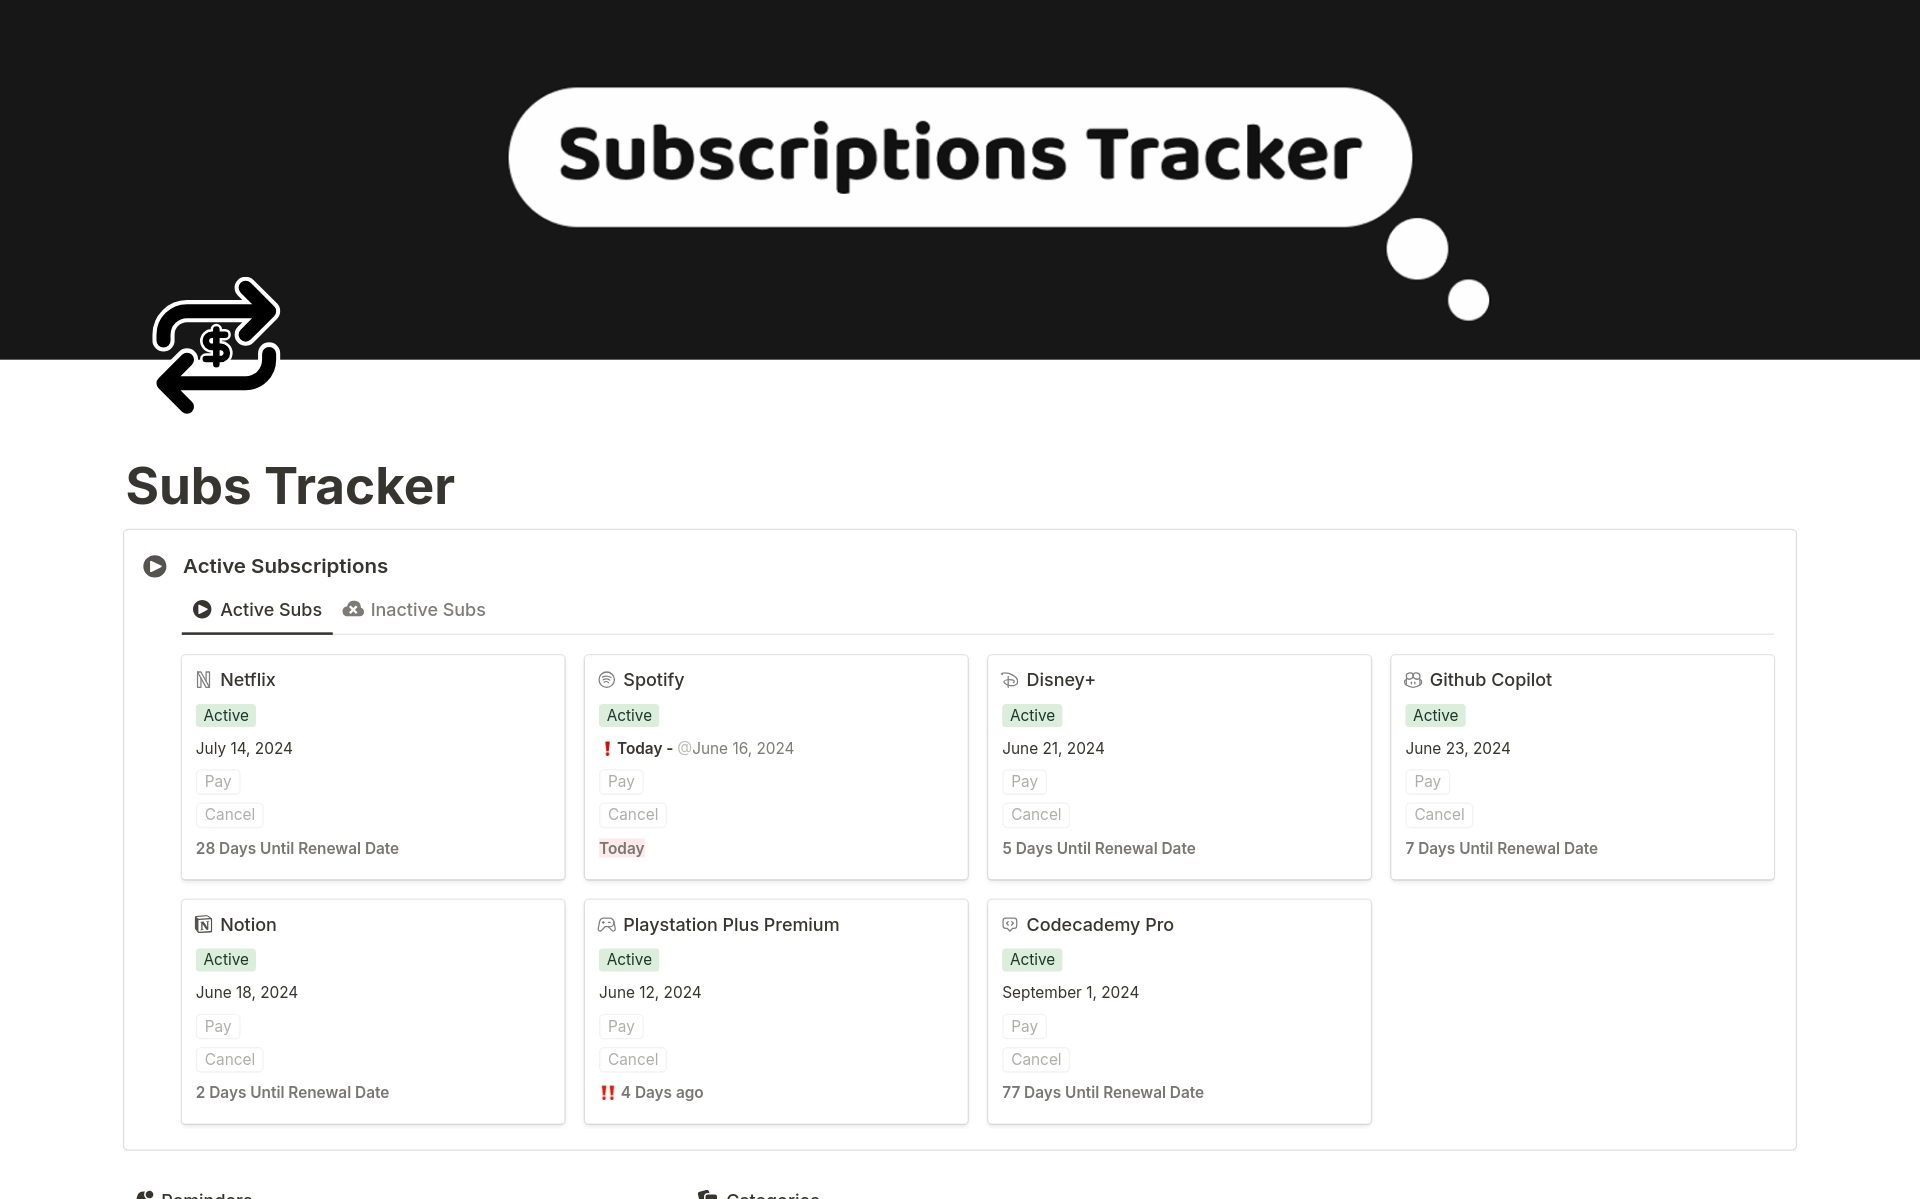 Track and manage all your subscriptions in one place with this Notion template. Track expenses, and categorize services easily. Stay organized and never miss a payment. Ideal for managing streaming, software, and more. Simple setup, customizable views.